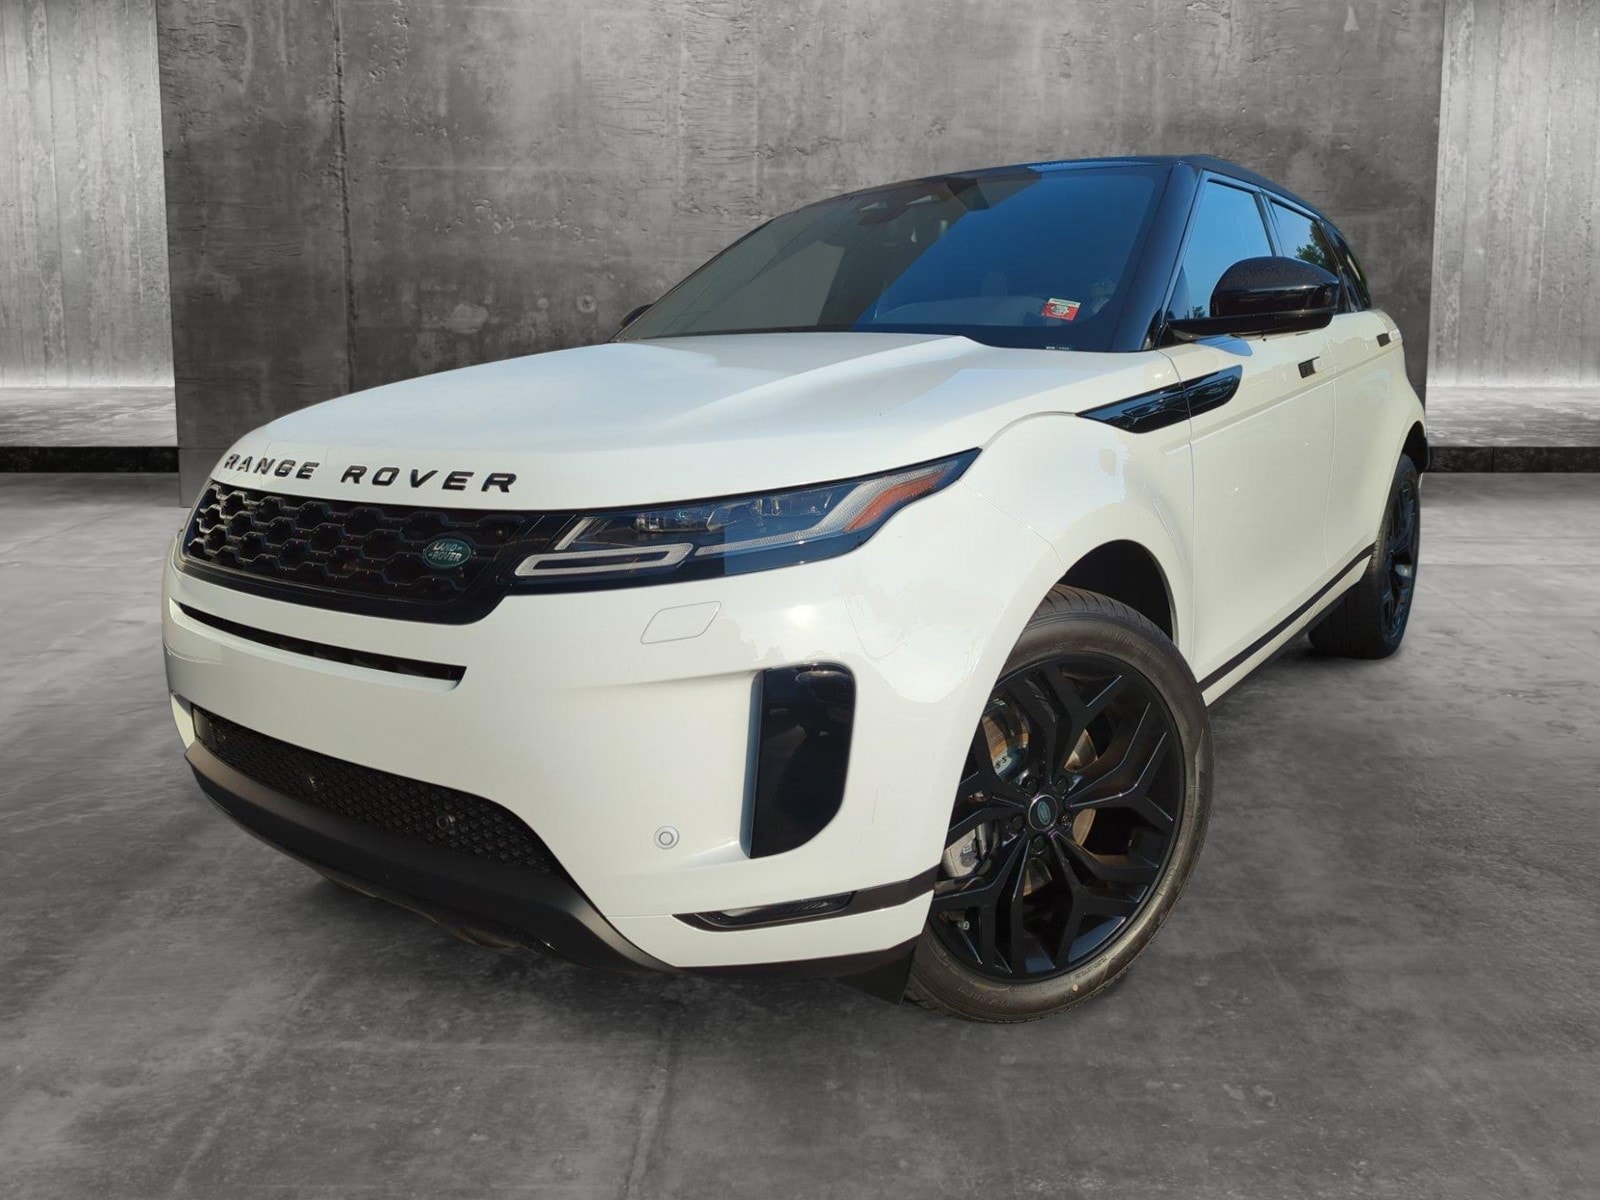 New Inventory  New Range Rover, Defender, and Discovery for Sale Near Me  Elmsford, NY